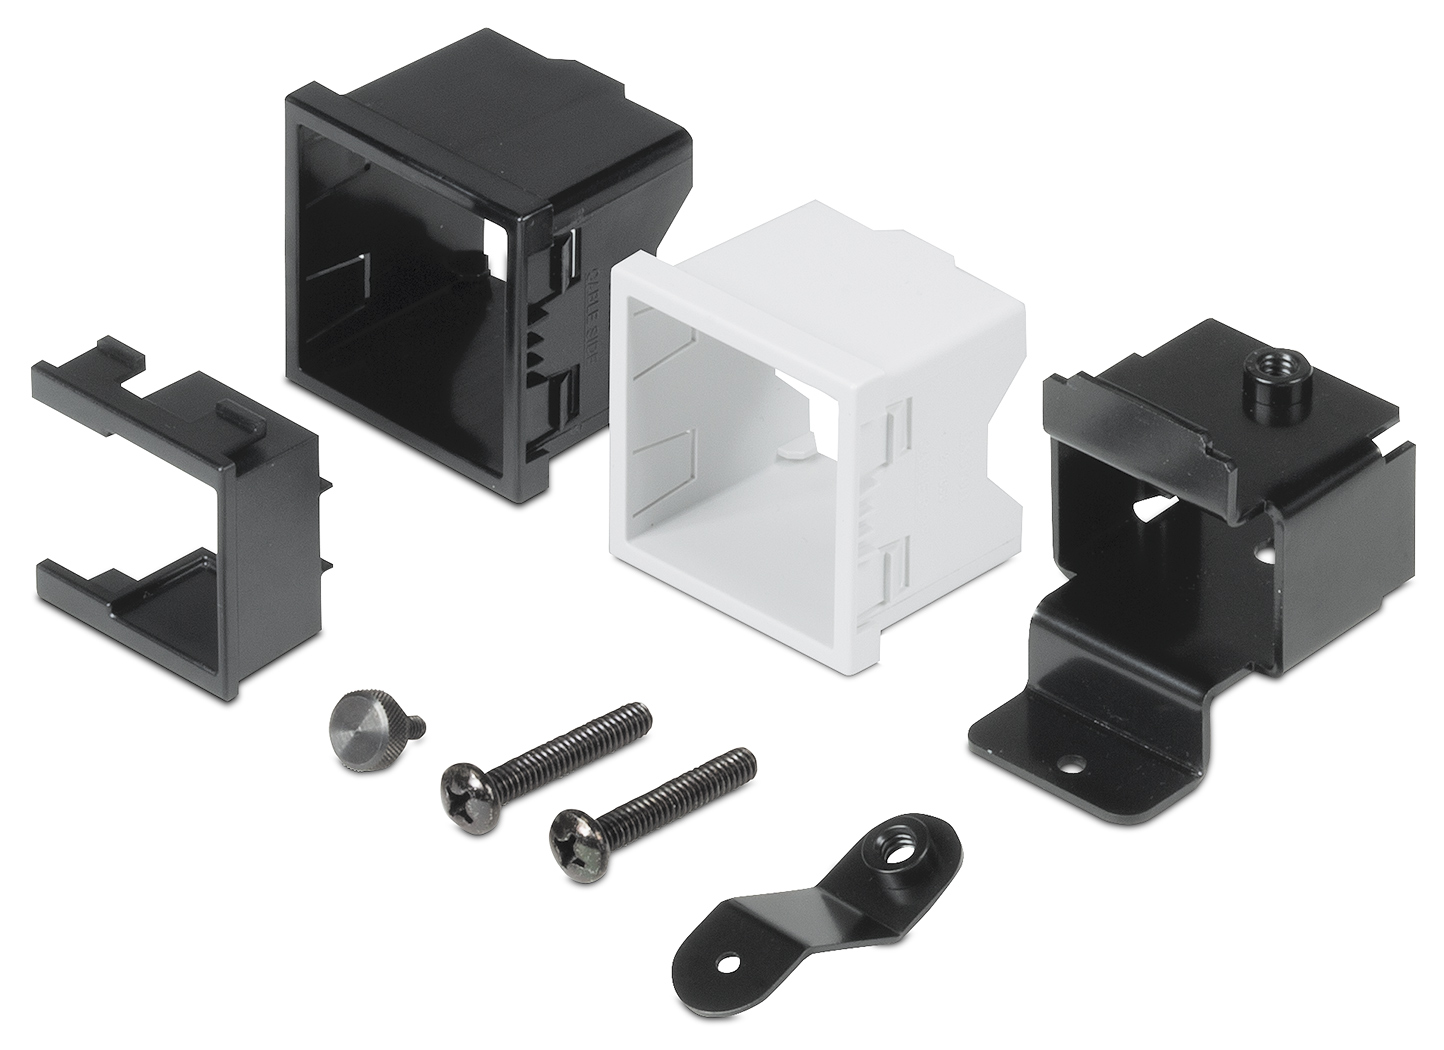 Retractor Mounting Bracket kit holds one Retractor or Retractor XL cable retraction module; Part # 70‑1353‑02